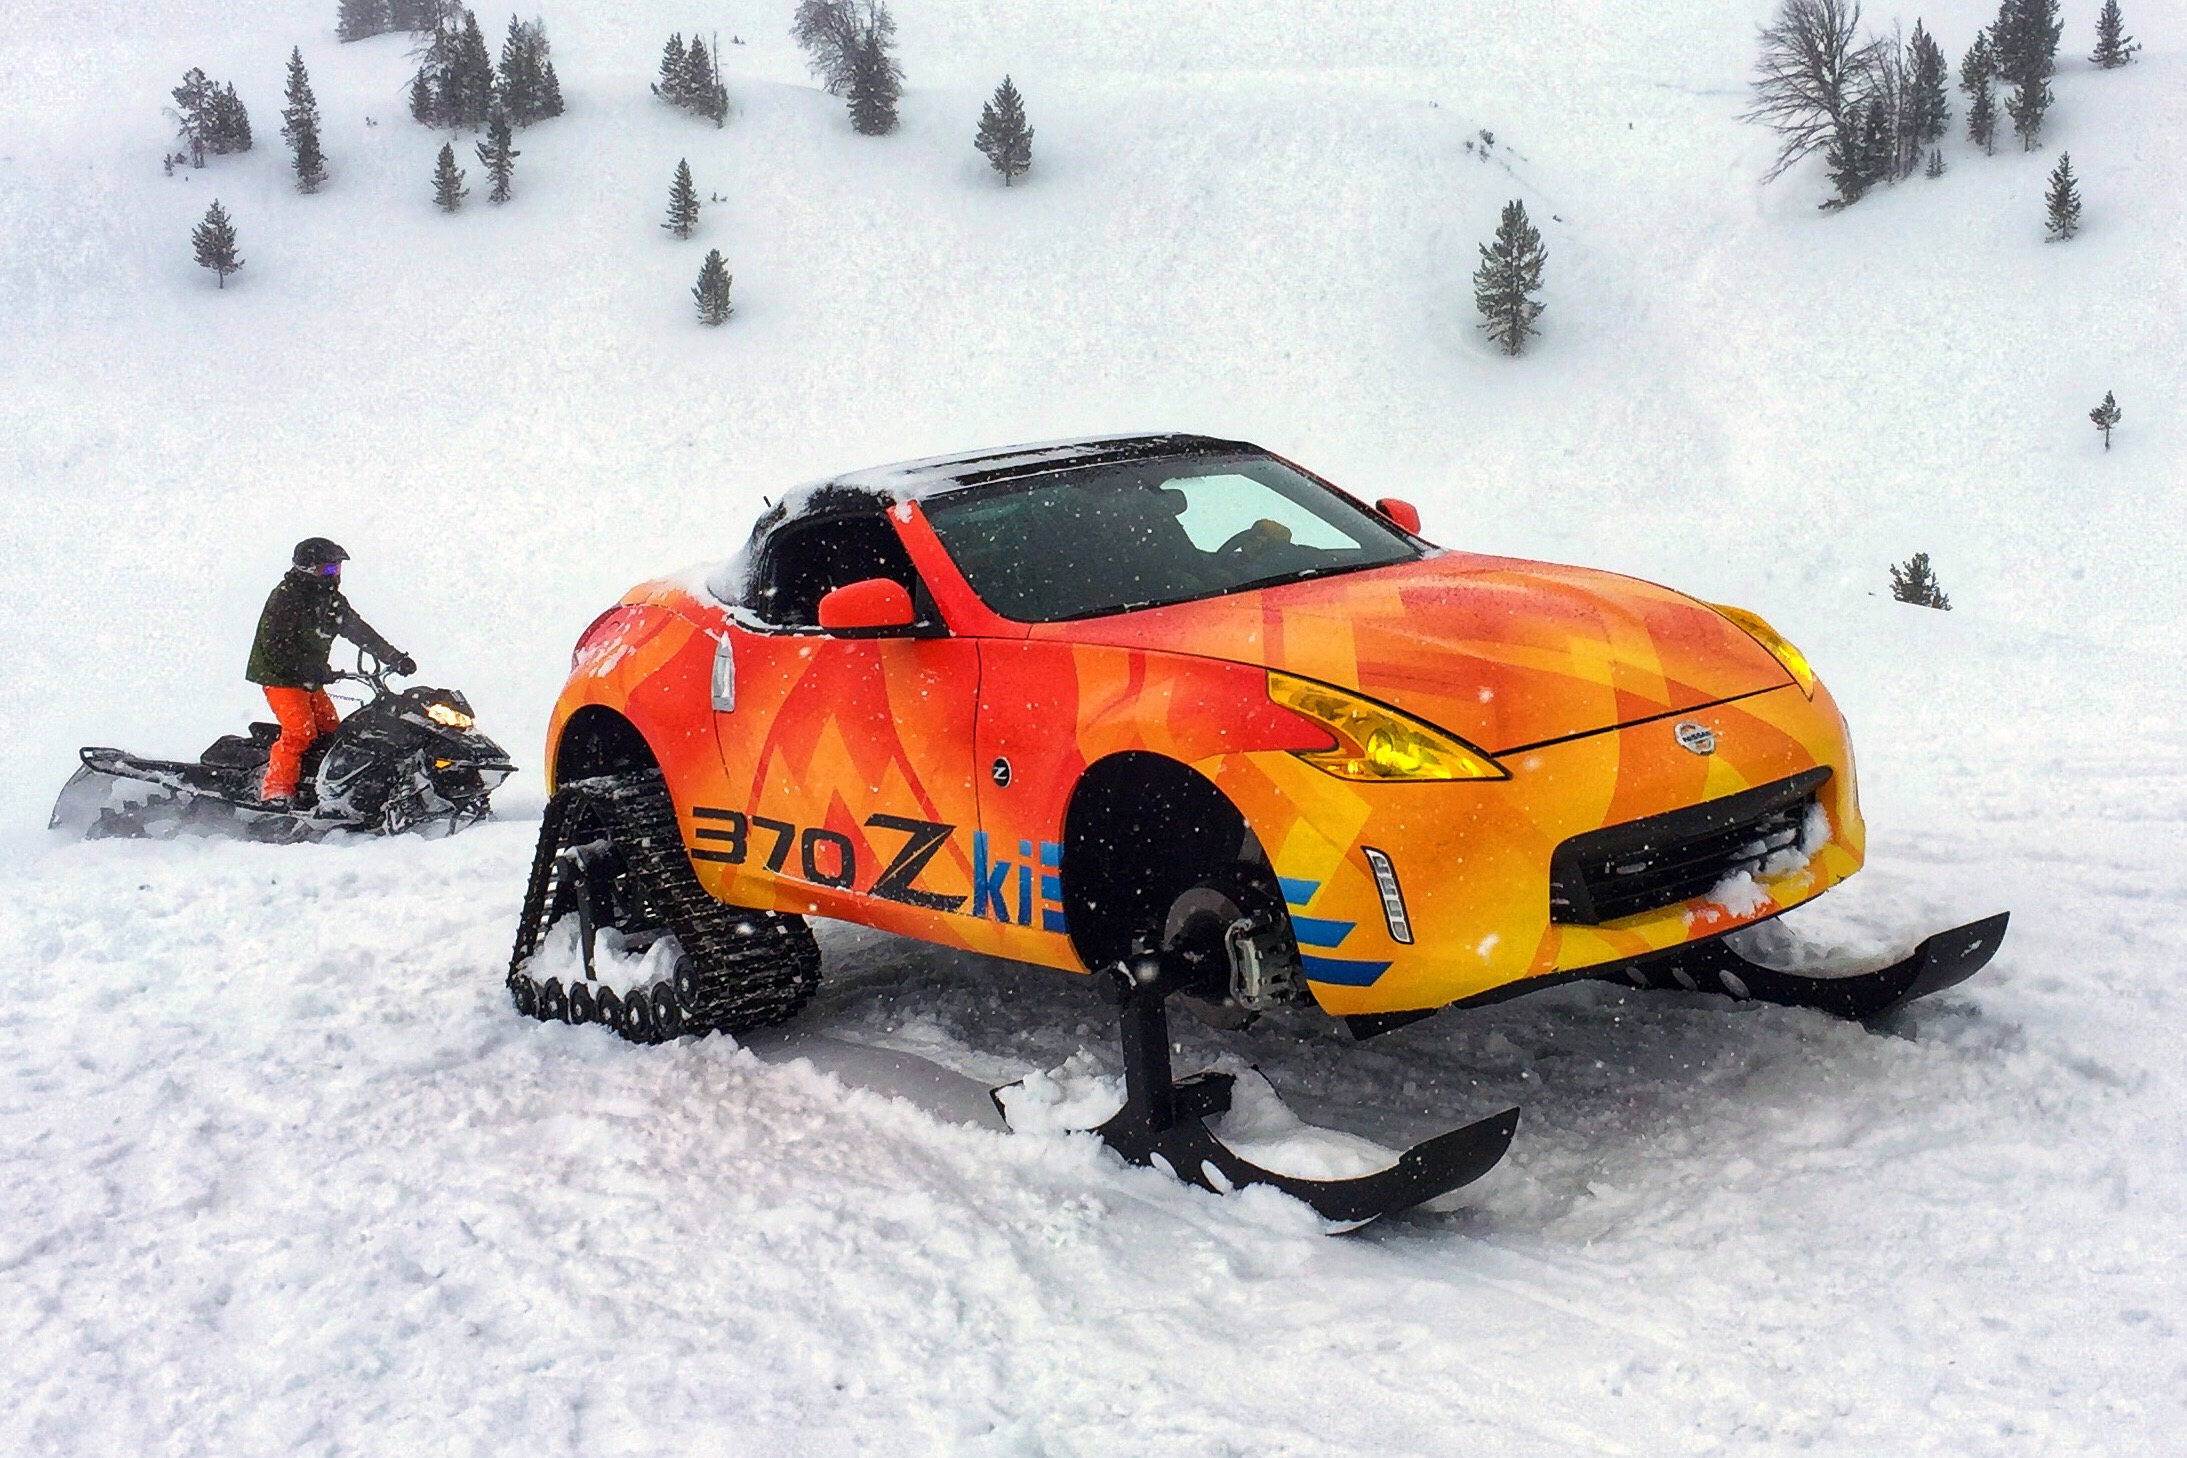 Nissan converts 370Z into a snow mobile with 370Zki concept